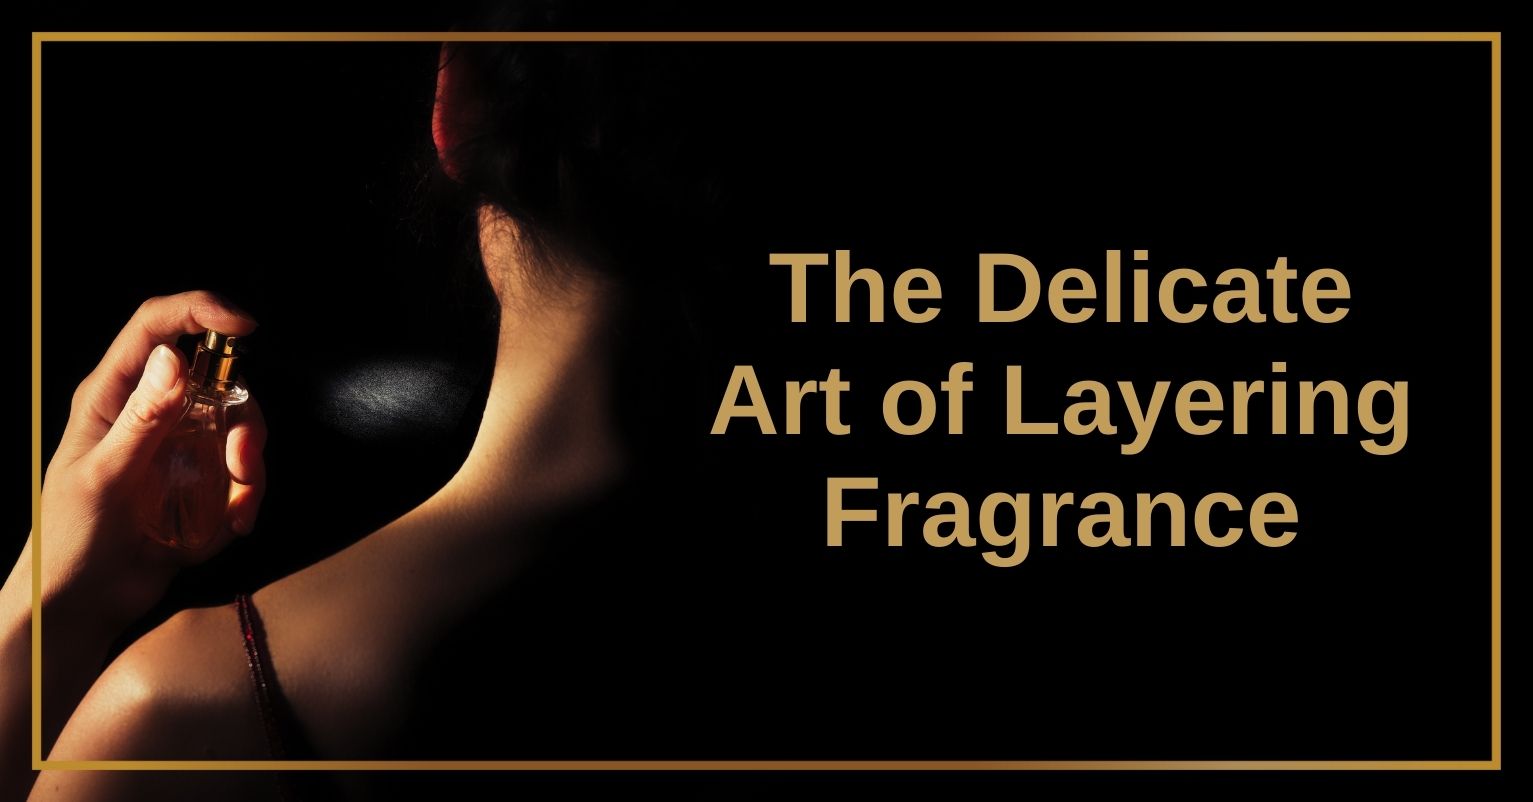 The Delicate Art of Layering Fragrance